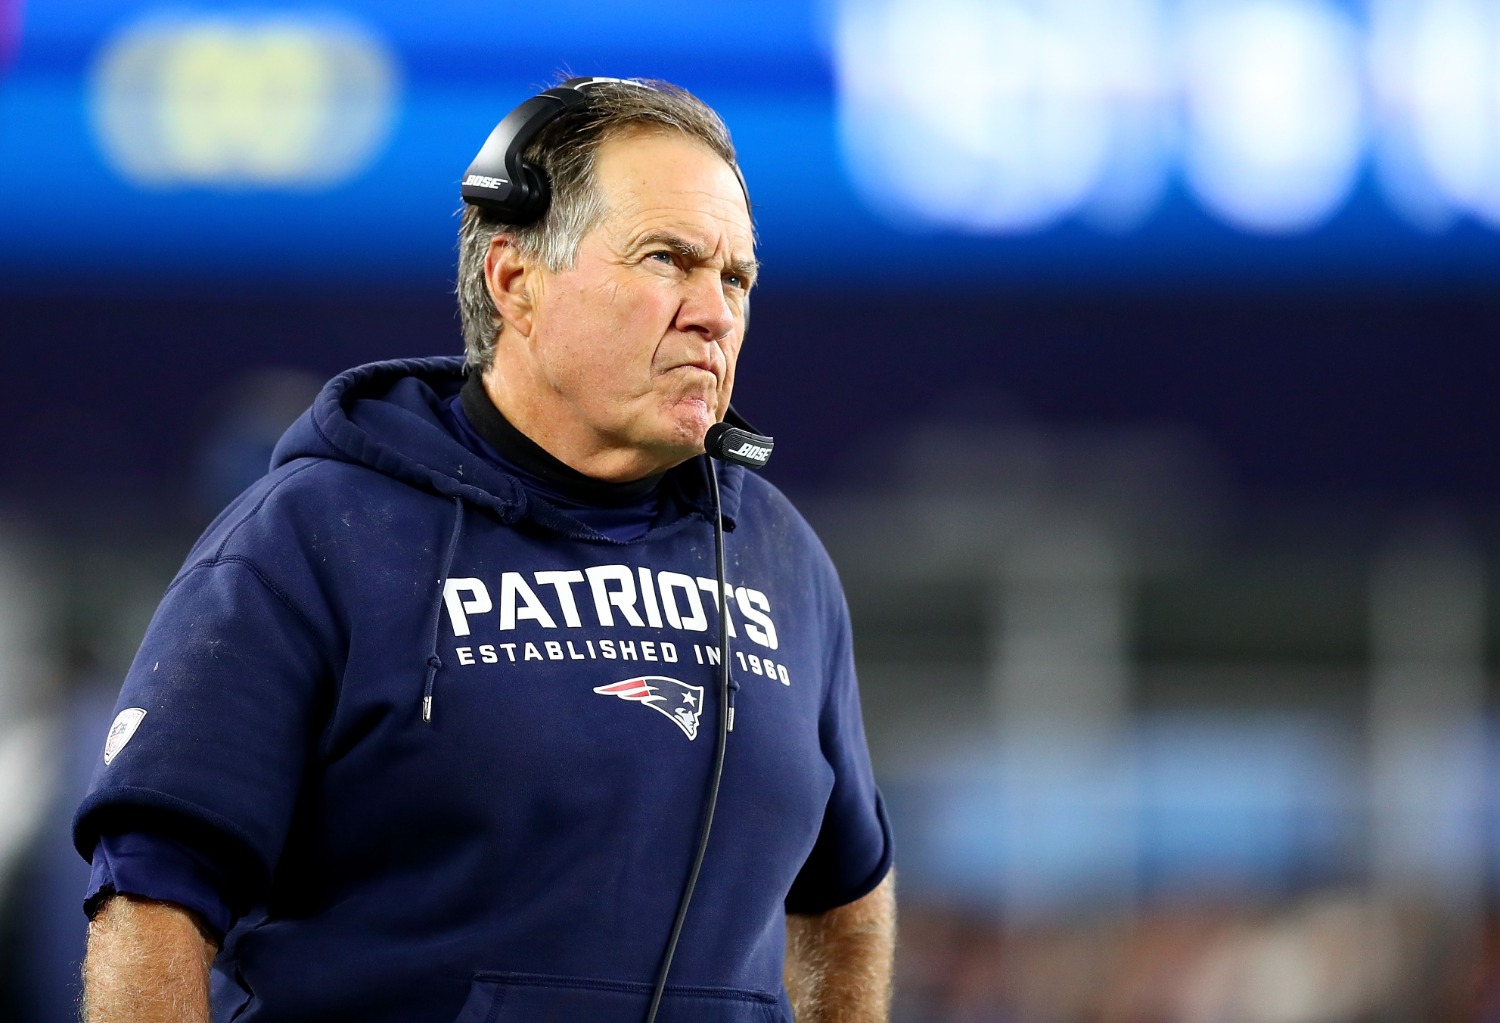 Bill Belichick just revealed his first impression of Cam Newton.